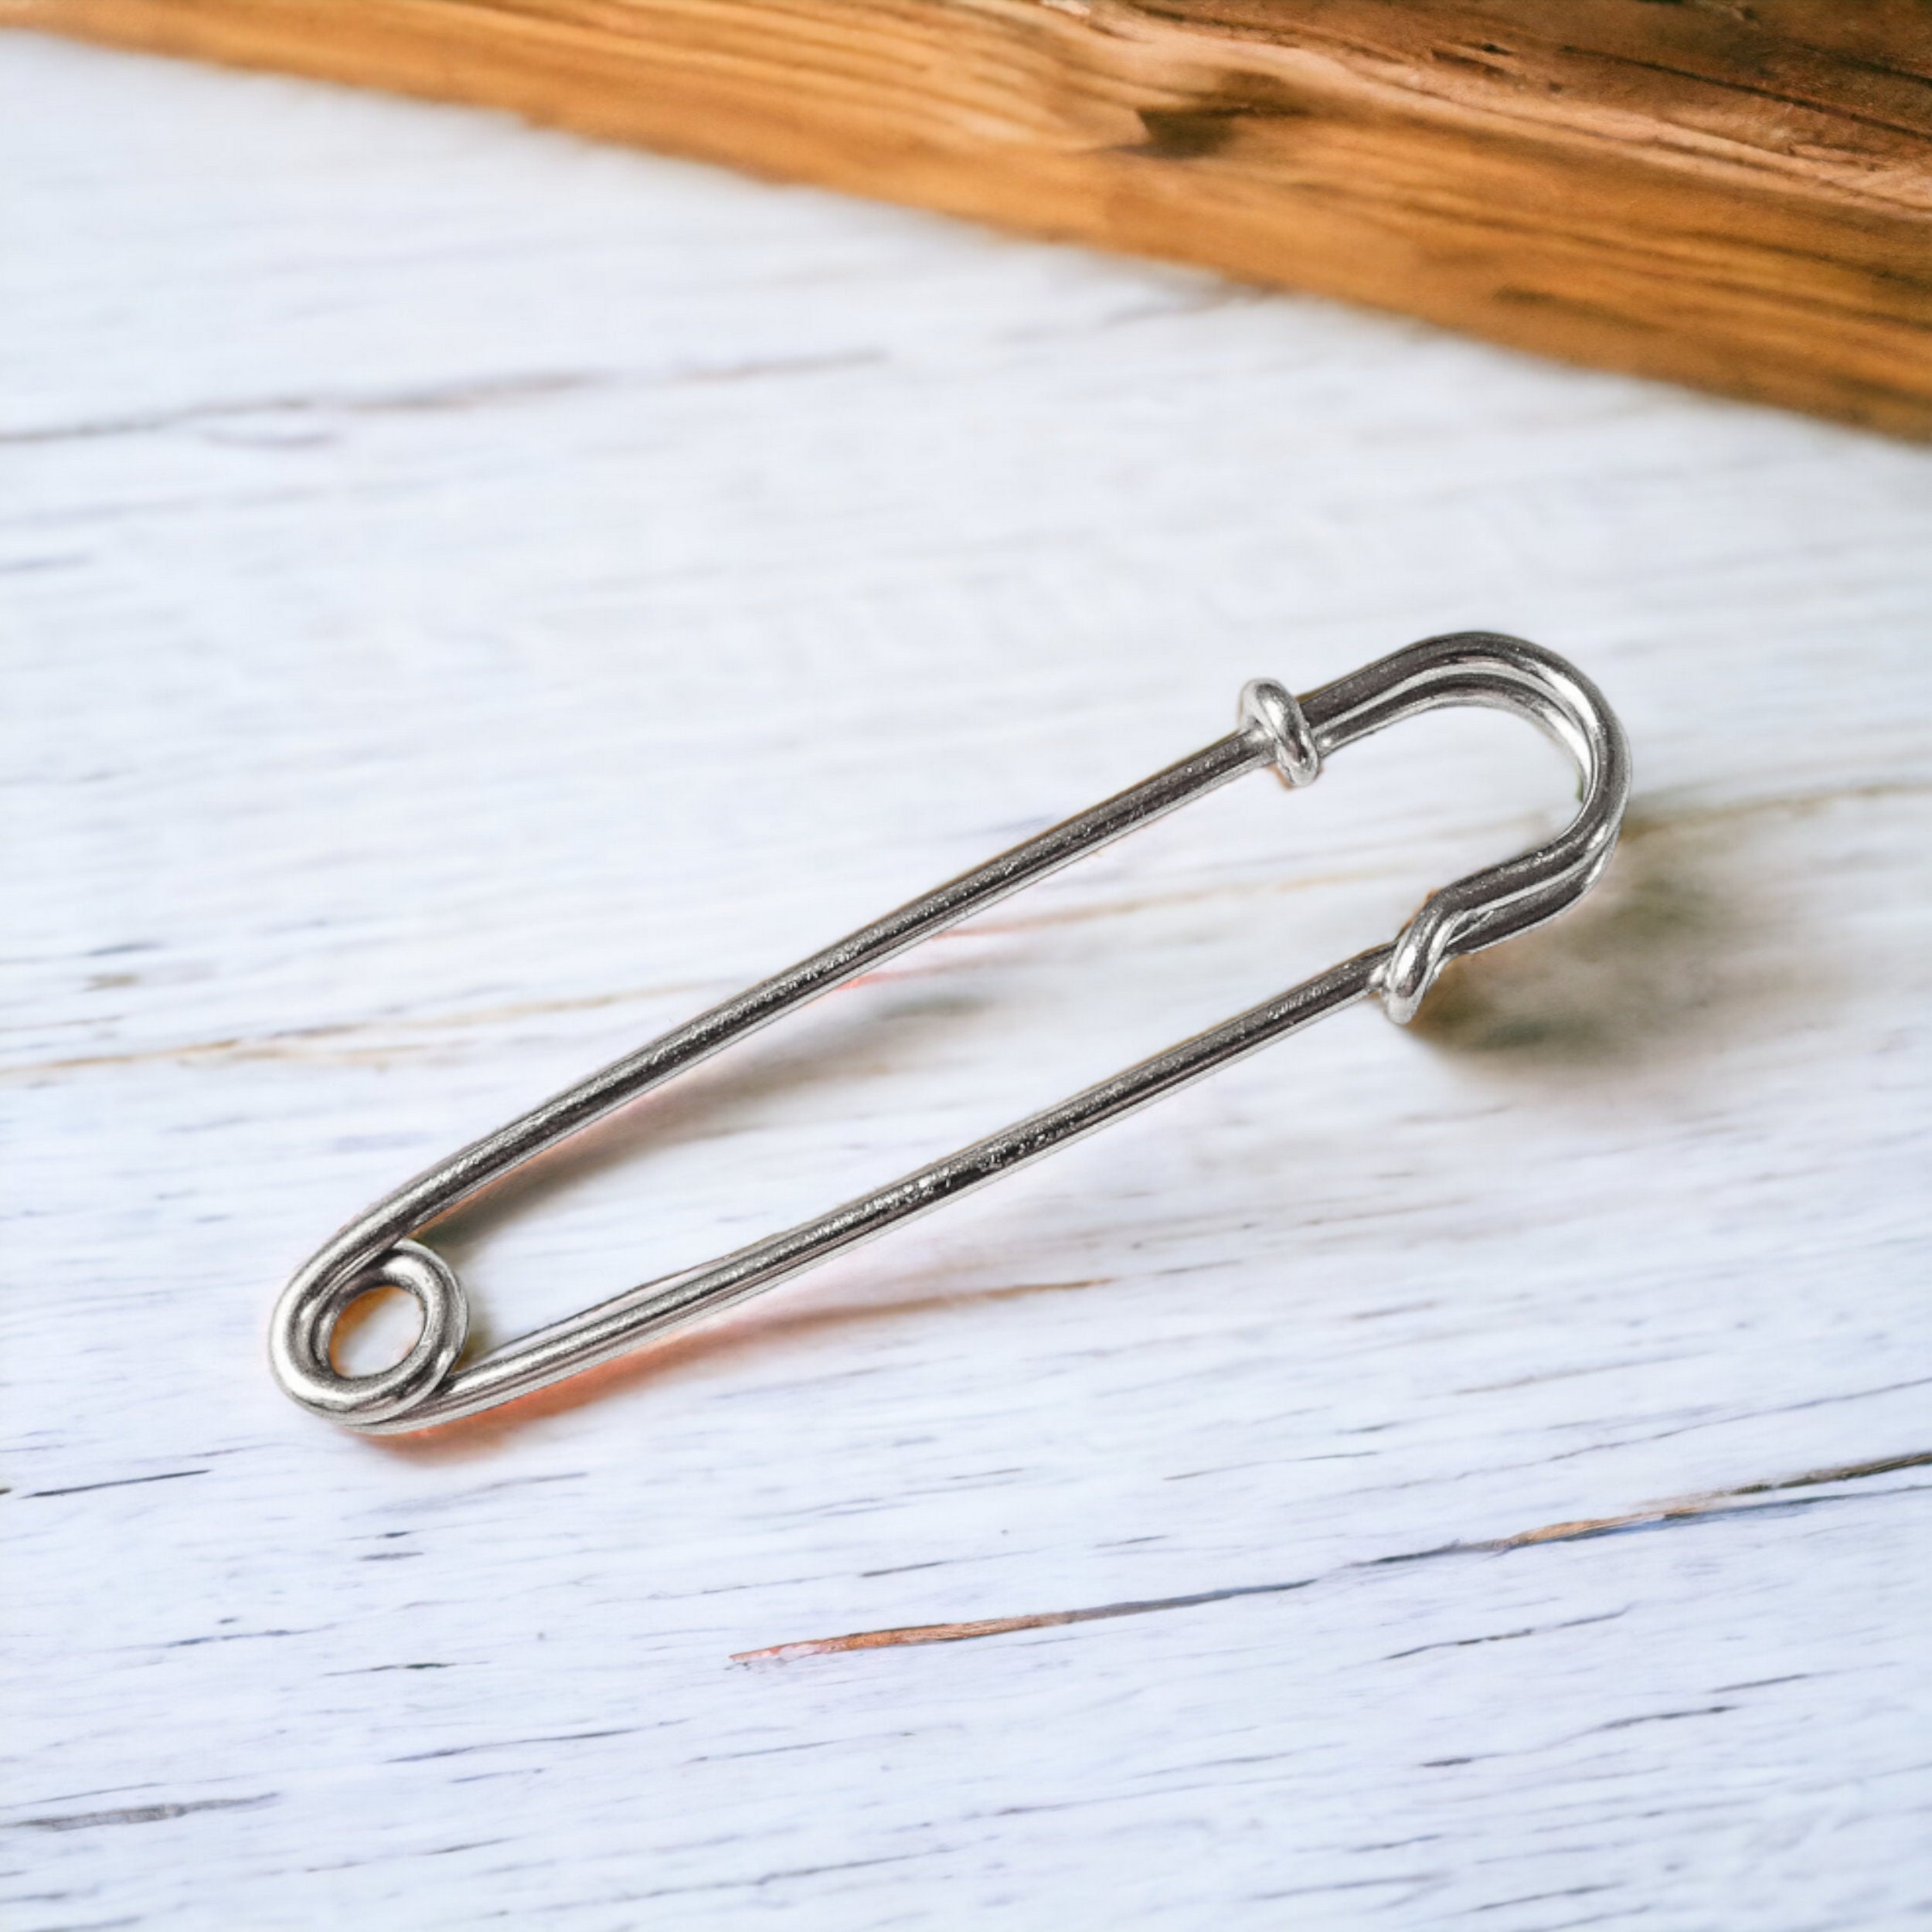 Antique Metal Diaper Pin - antiques - by owner - collectibles sale